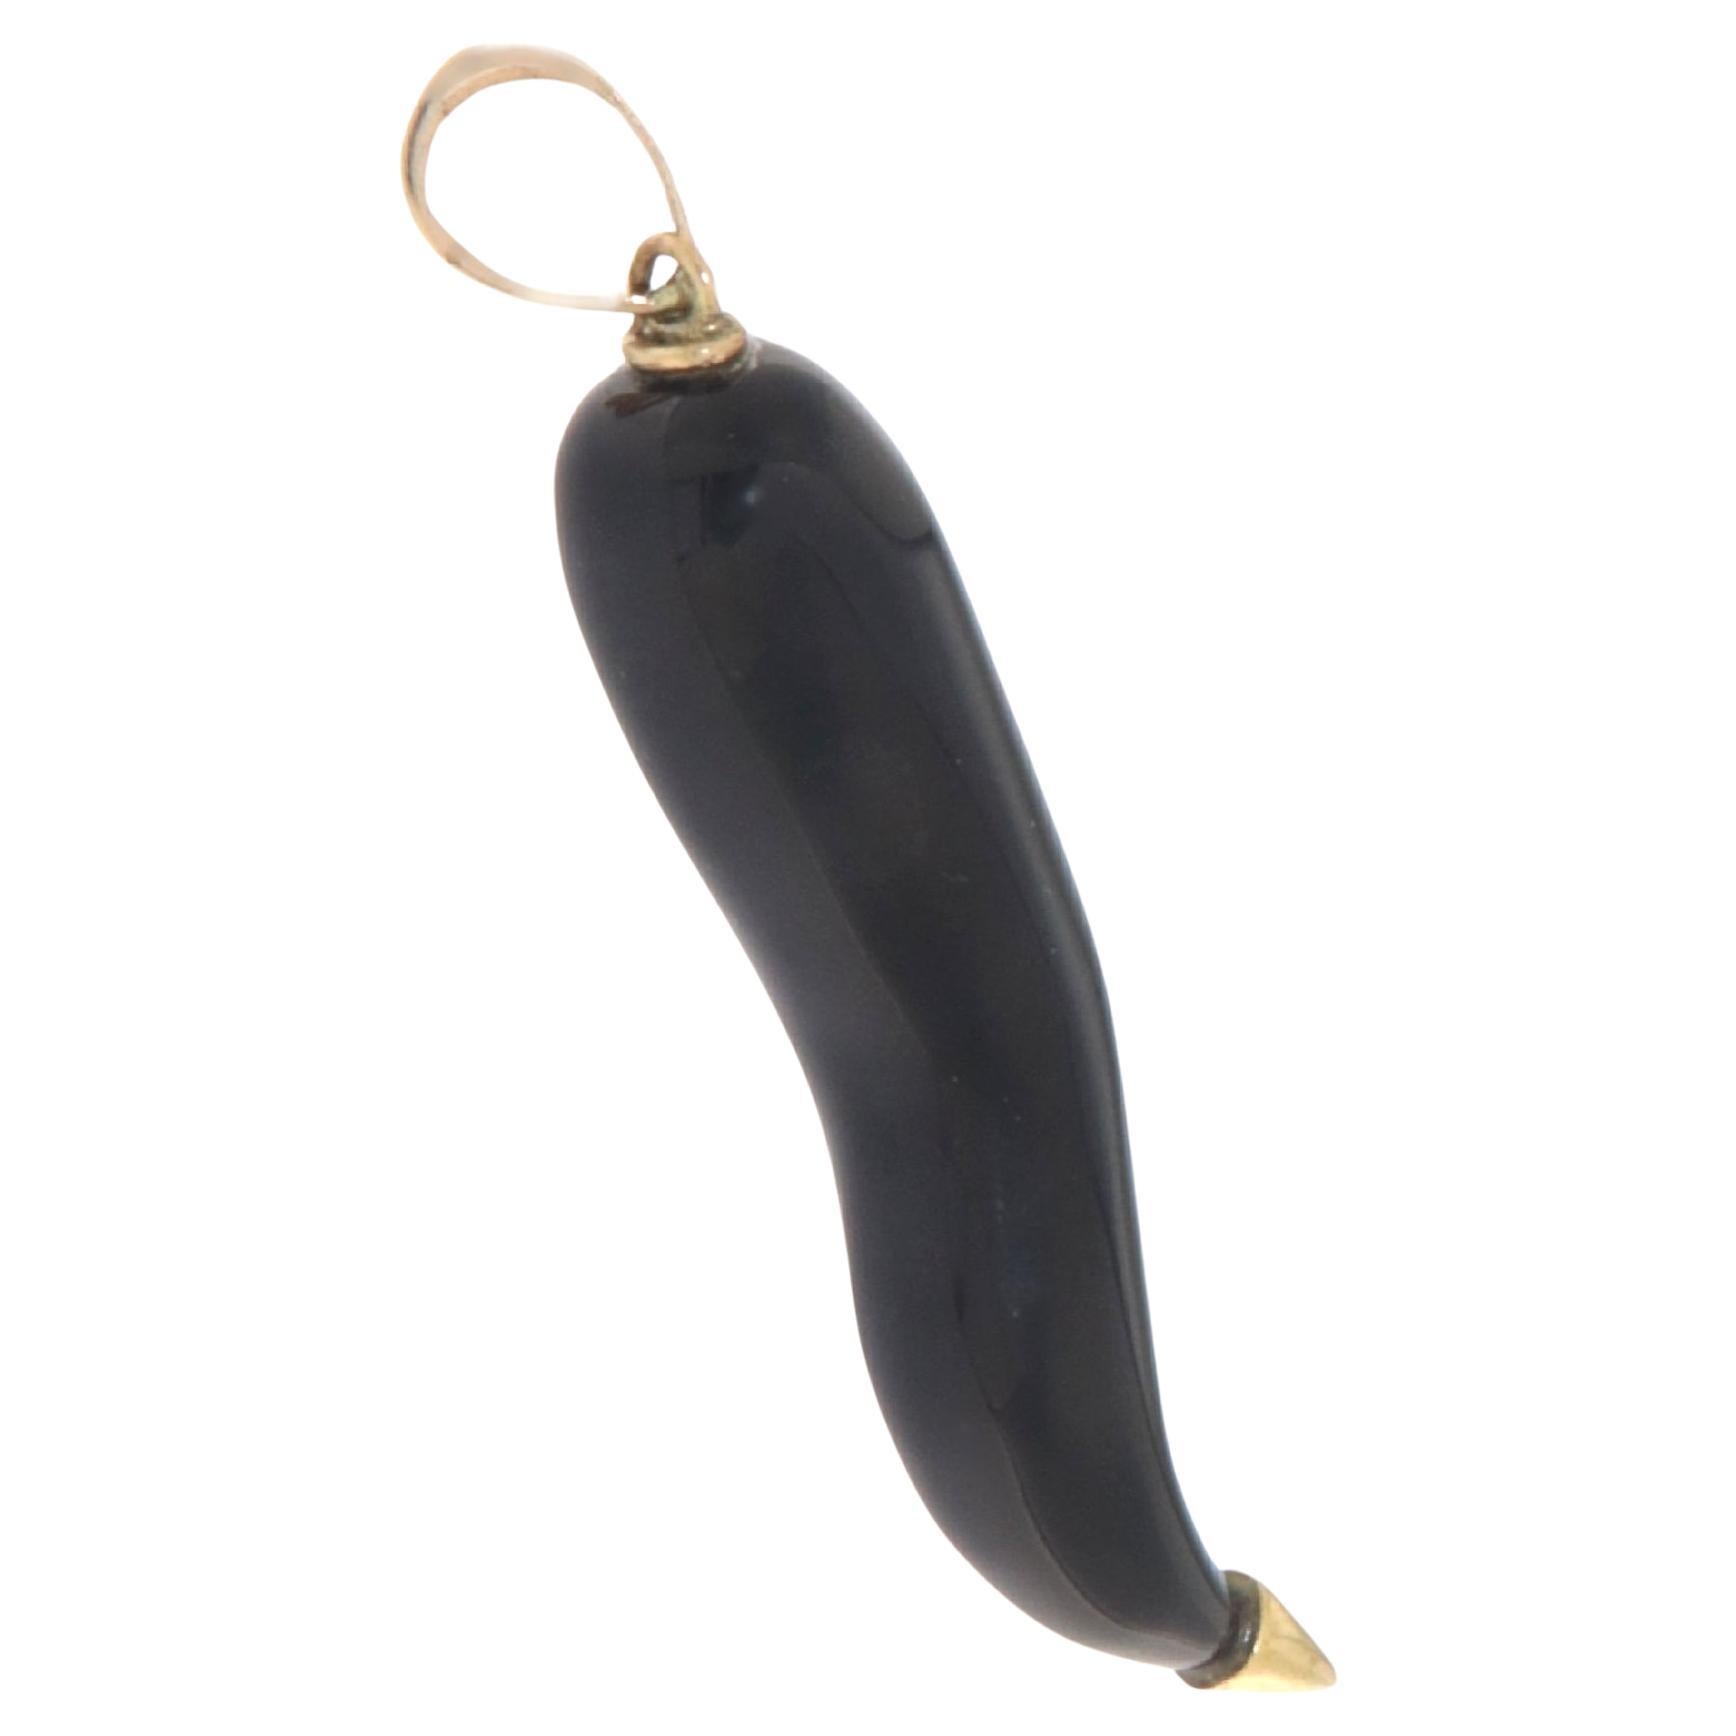 This elegant pendant, crafted in 14-karat yellow gold, is a distinctive symbol of protection and luck, featuring a horn masterfully created from onyx. The choice of onyx, a stone known for its strength and ability to ward off negative energies,